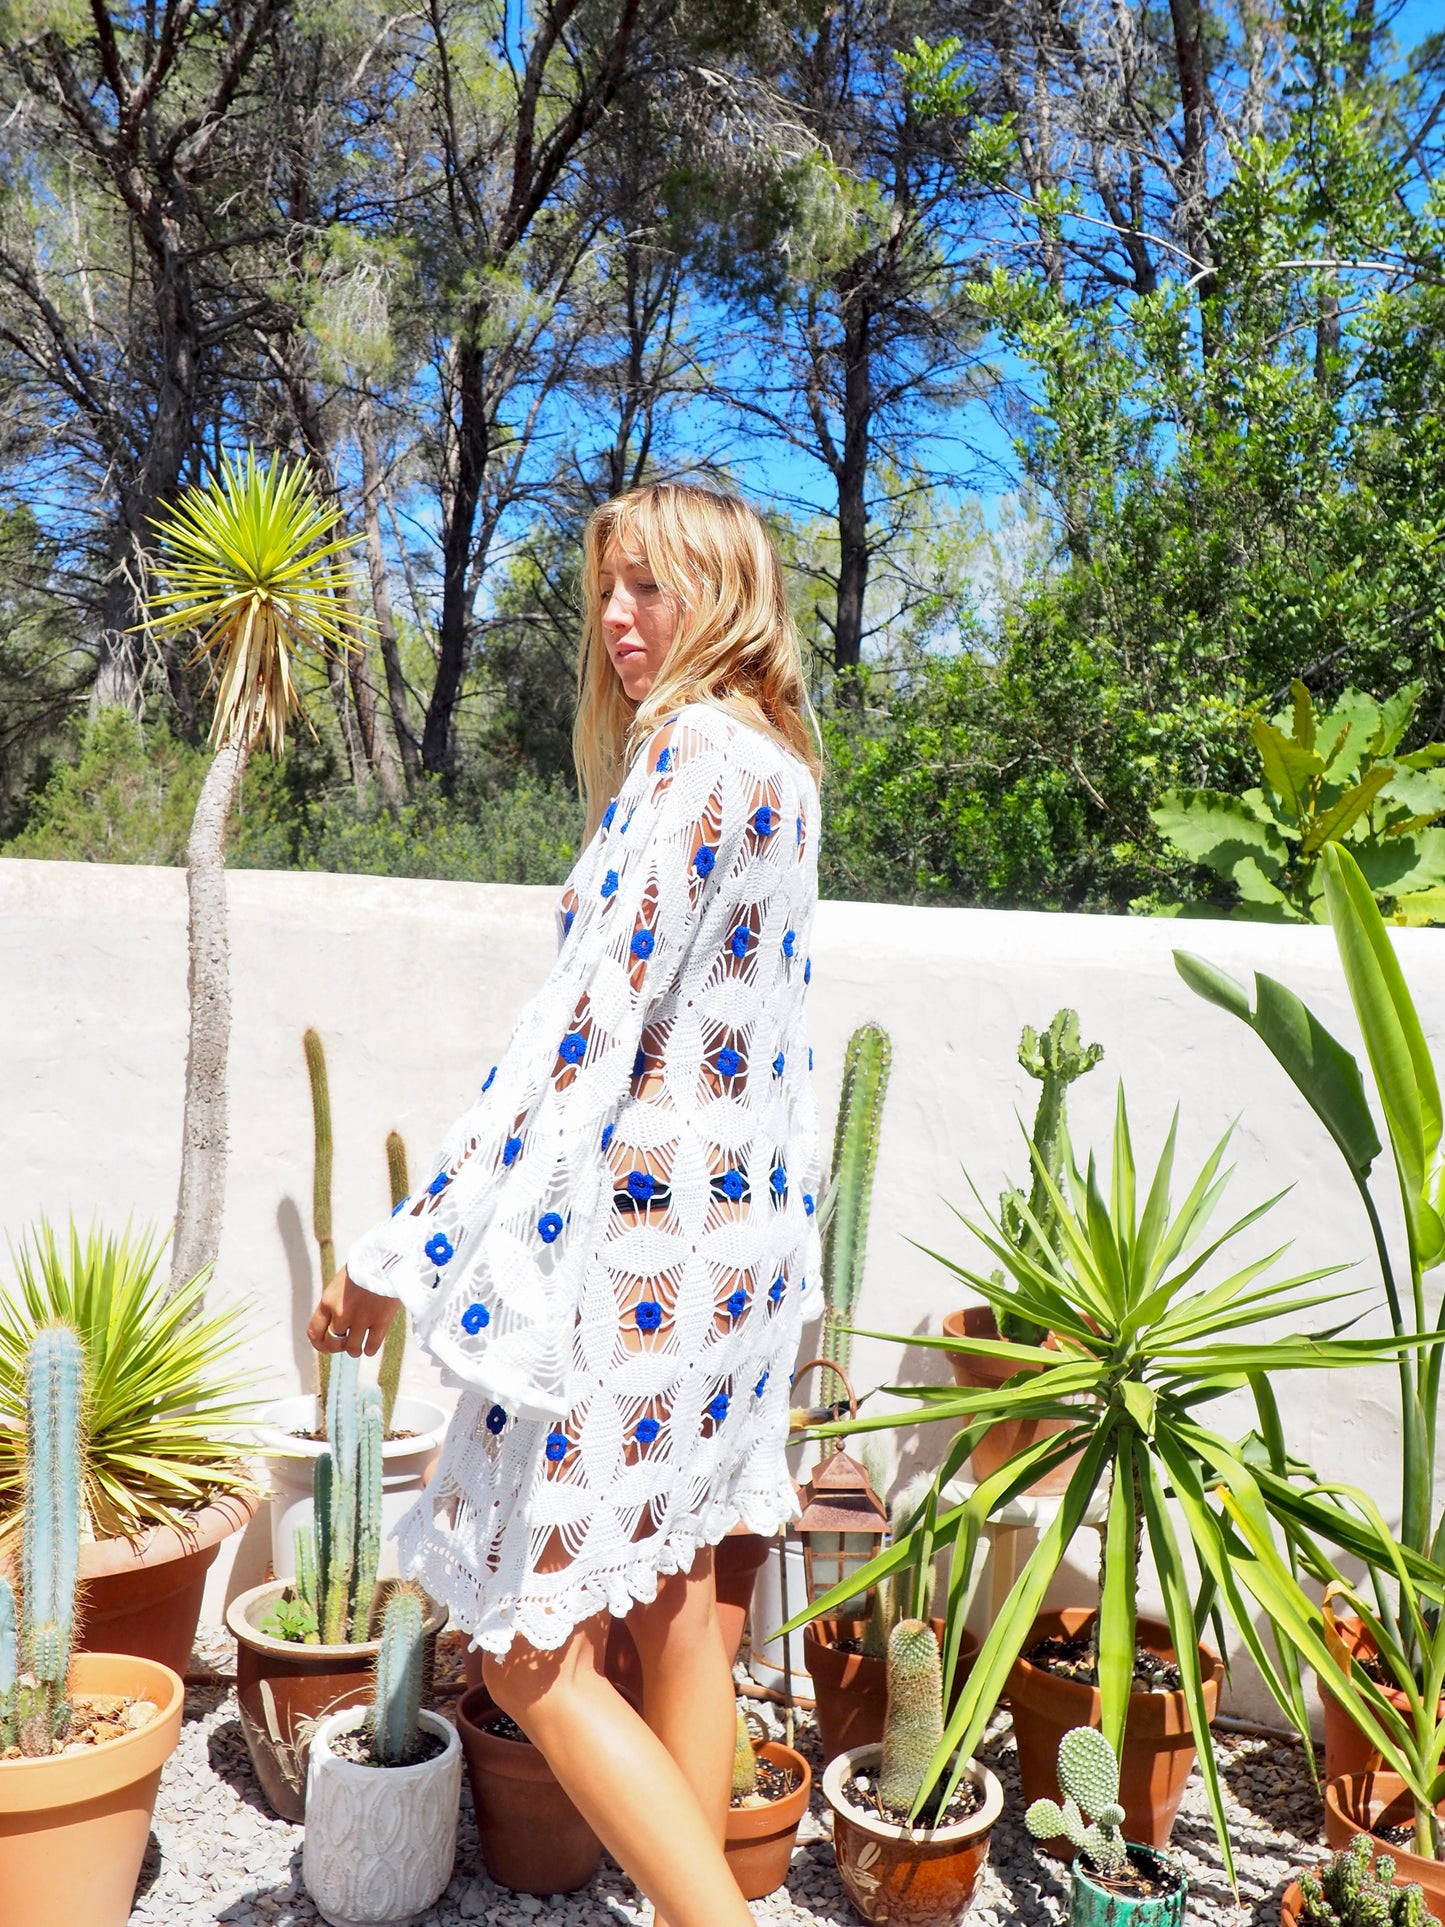 Amazing handmade vintage crochet textiles up-cycled bell sleeve dress with blue flower details by Vagabond Ibiza